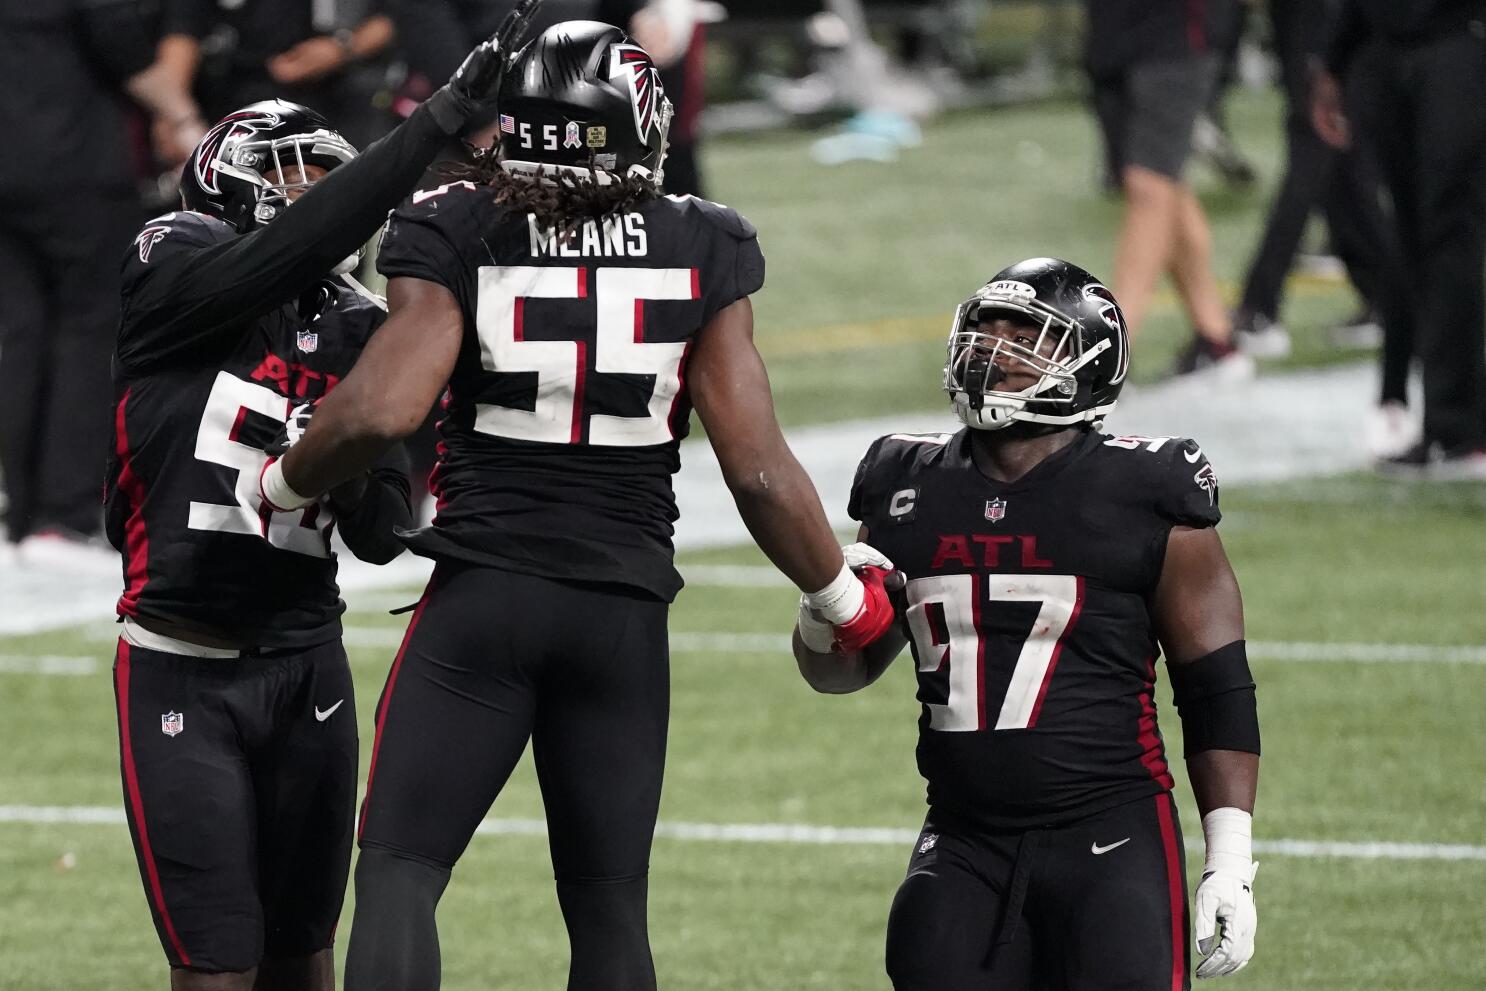 Falcons show plenty of pride after 0-5 start, coach change - The